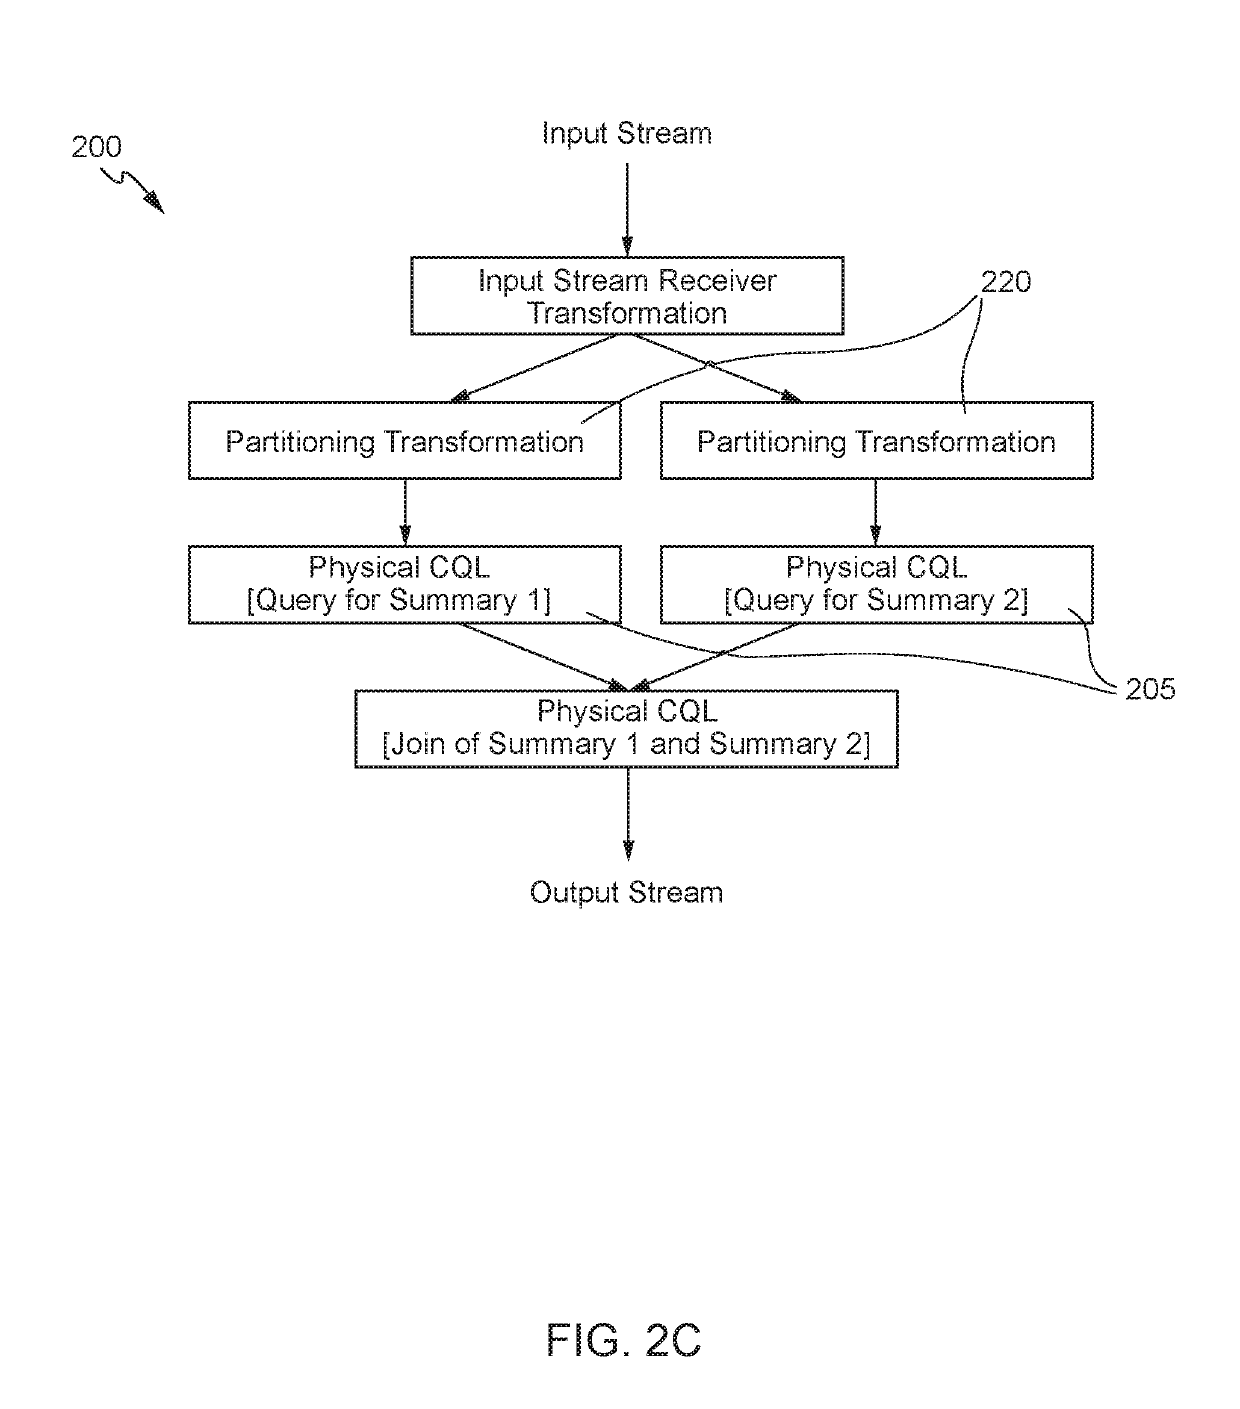 Logical queries in a distributed stream processing system